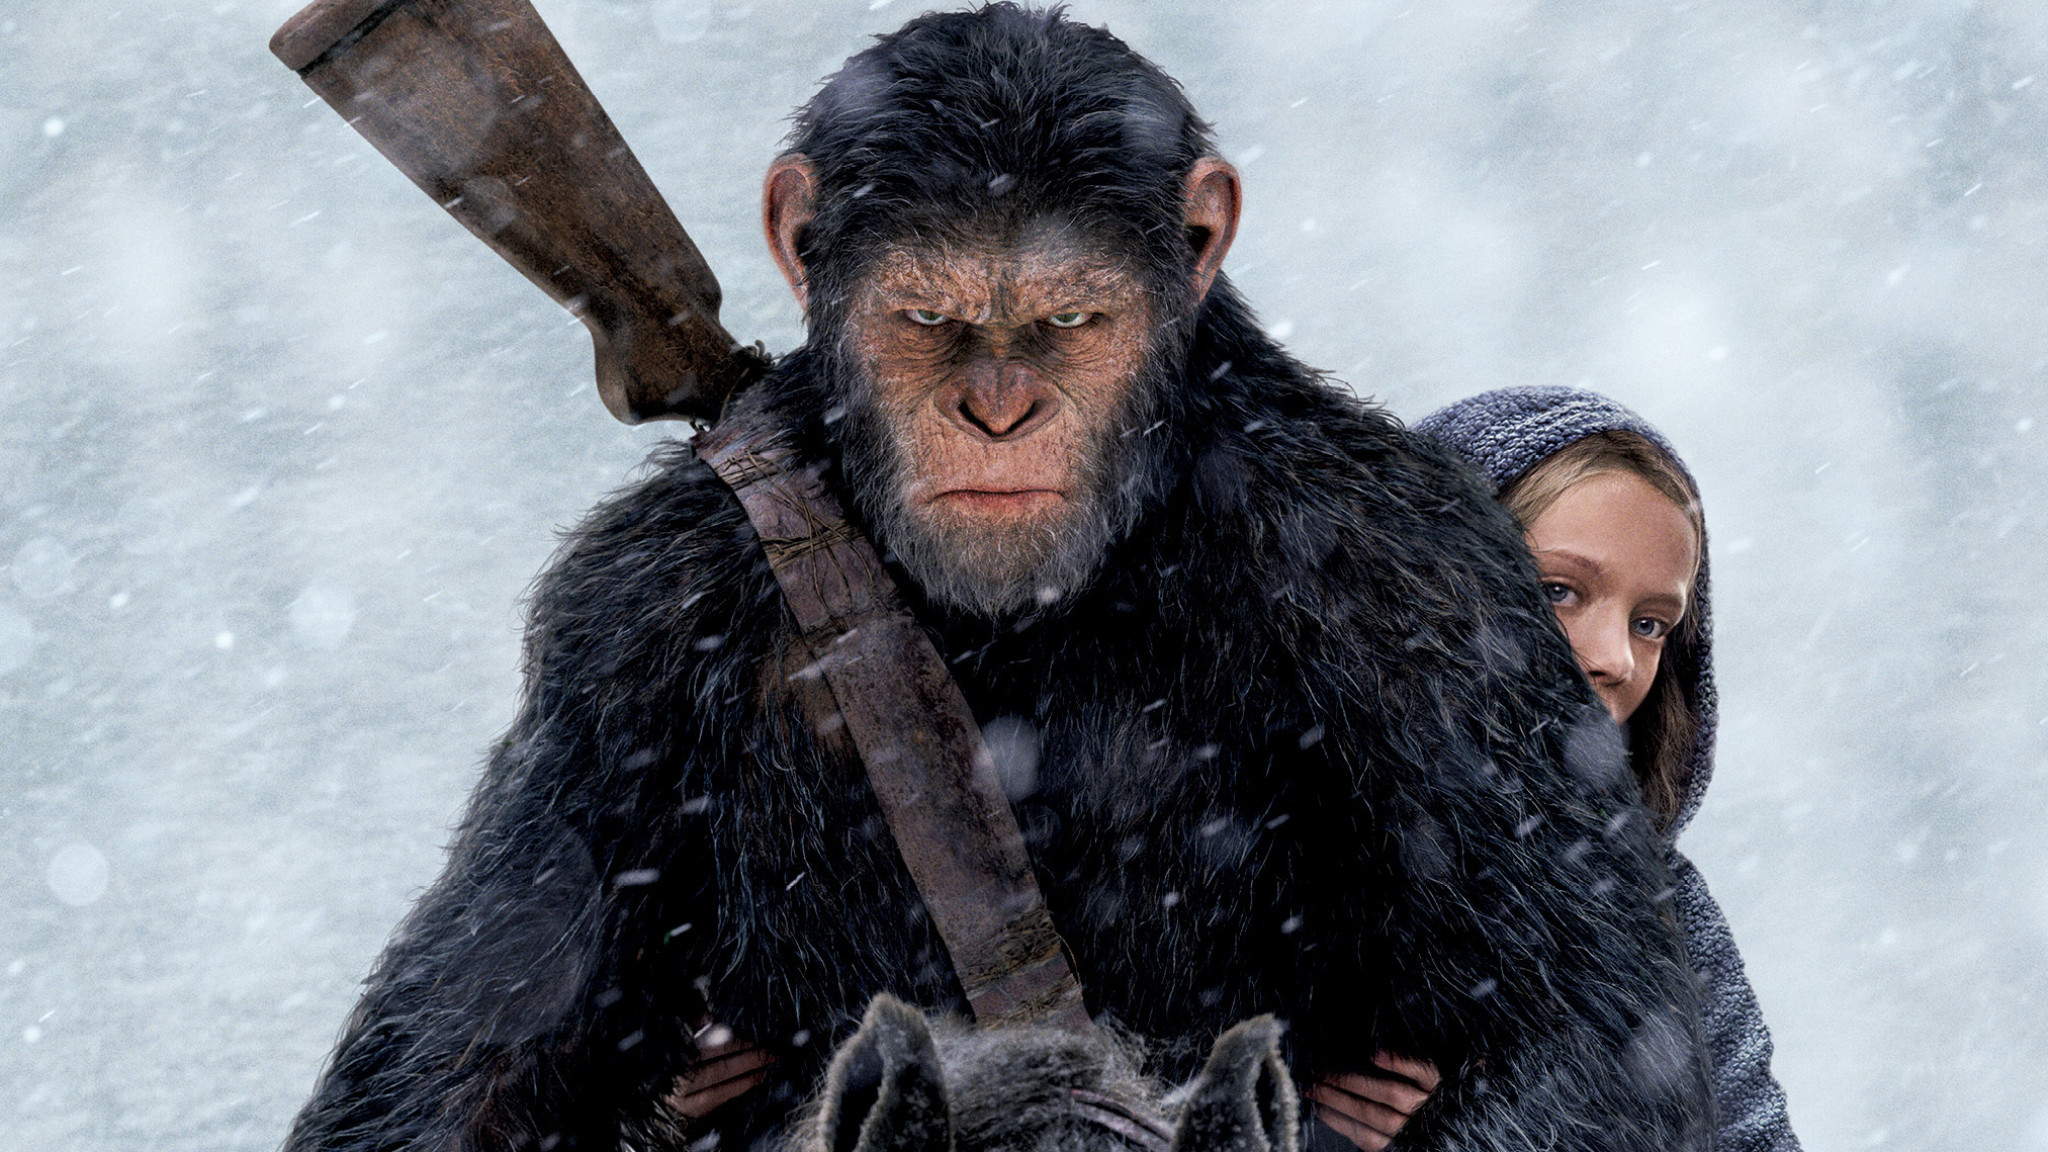 war for the planet of the apes wallpaper,primate,common chimpanzee,macaque,human,fictional character